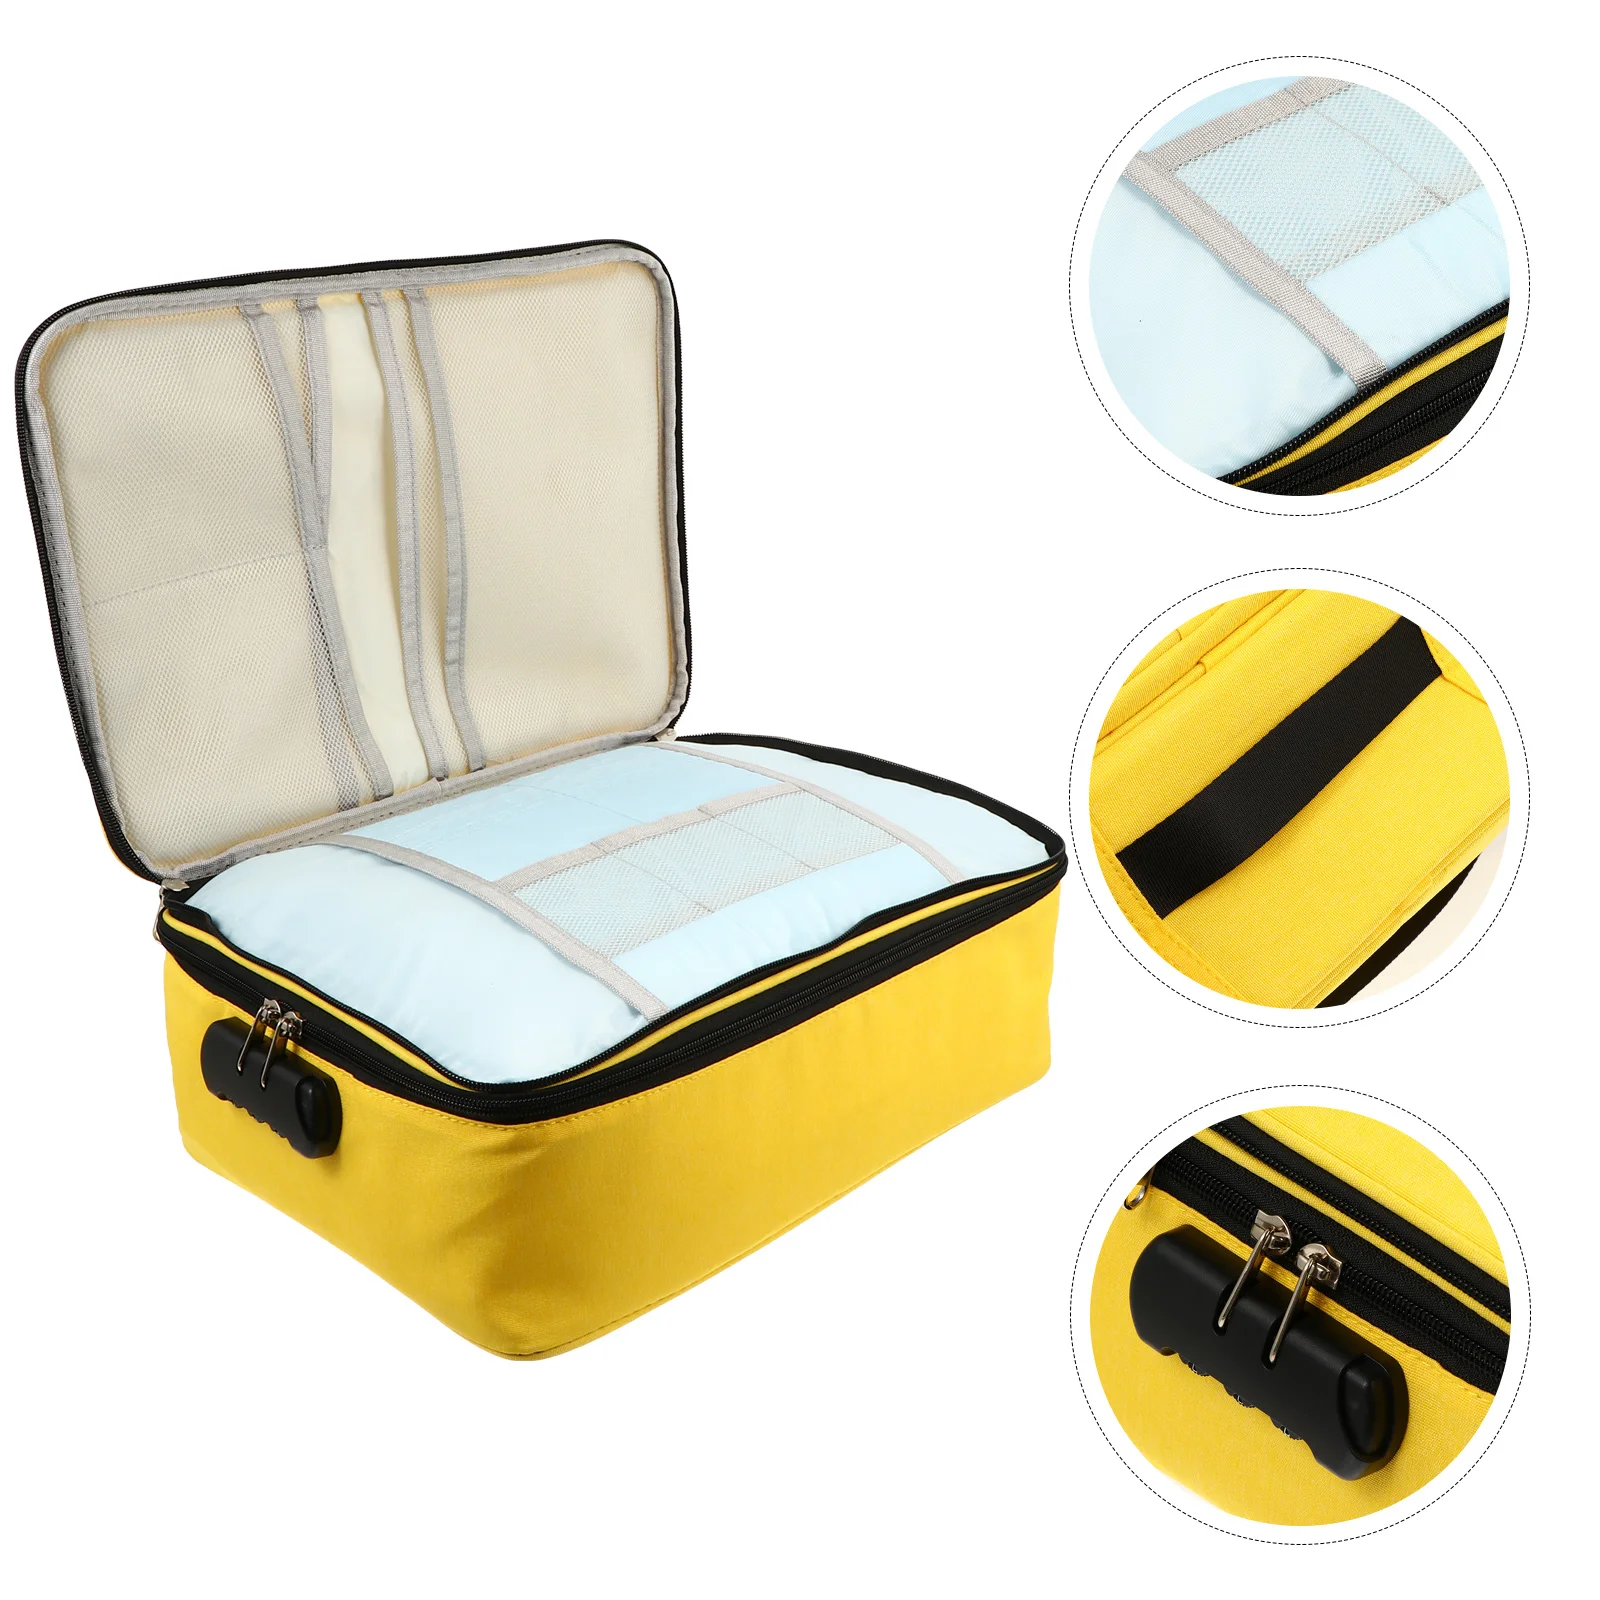 Makeup Trolley Bag Large Bags Pouch Credit Wallet Capacity Travel Sundries Case Luggage Storage High